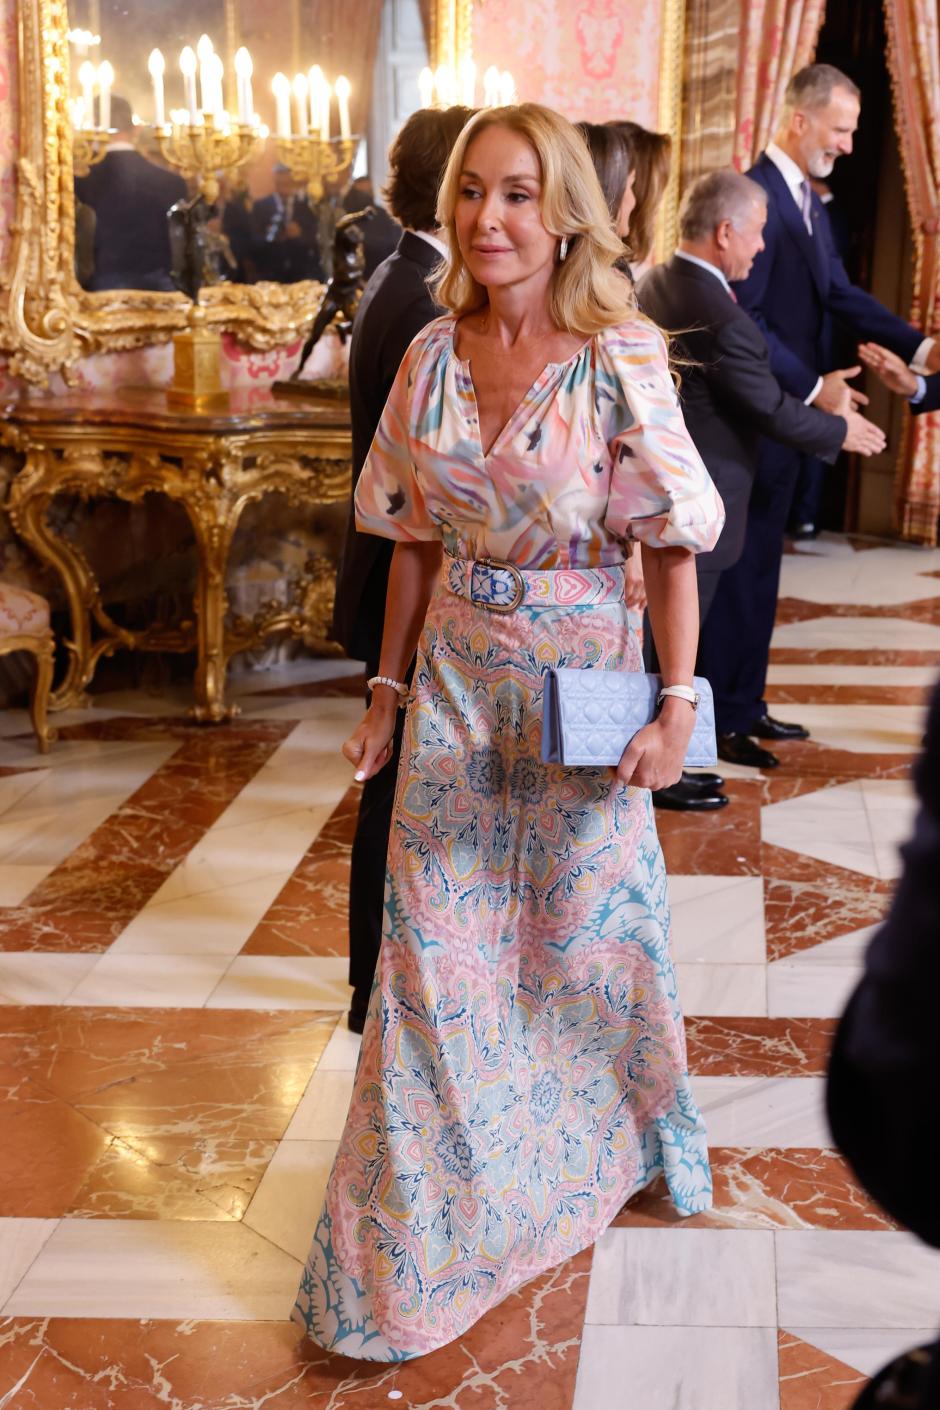 Esther Alcocer Koplowitz  during a lunch ceremony for Jordan King on occasion his official visit to Spain in ZarzuelaPalace in Madrid on Monday, 19 June 2023.